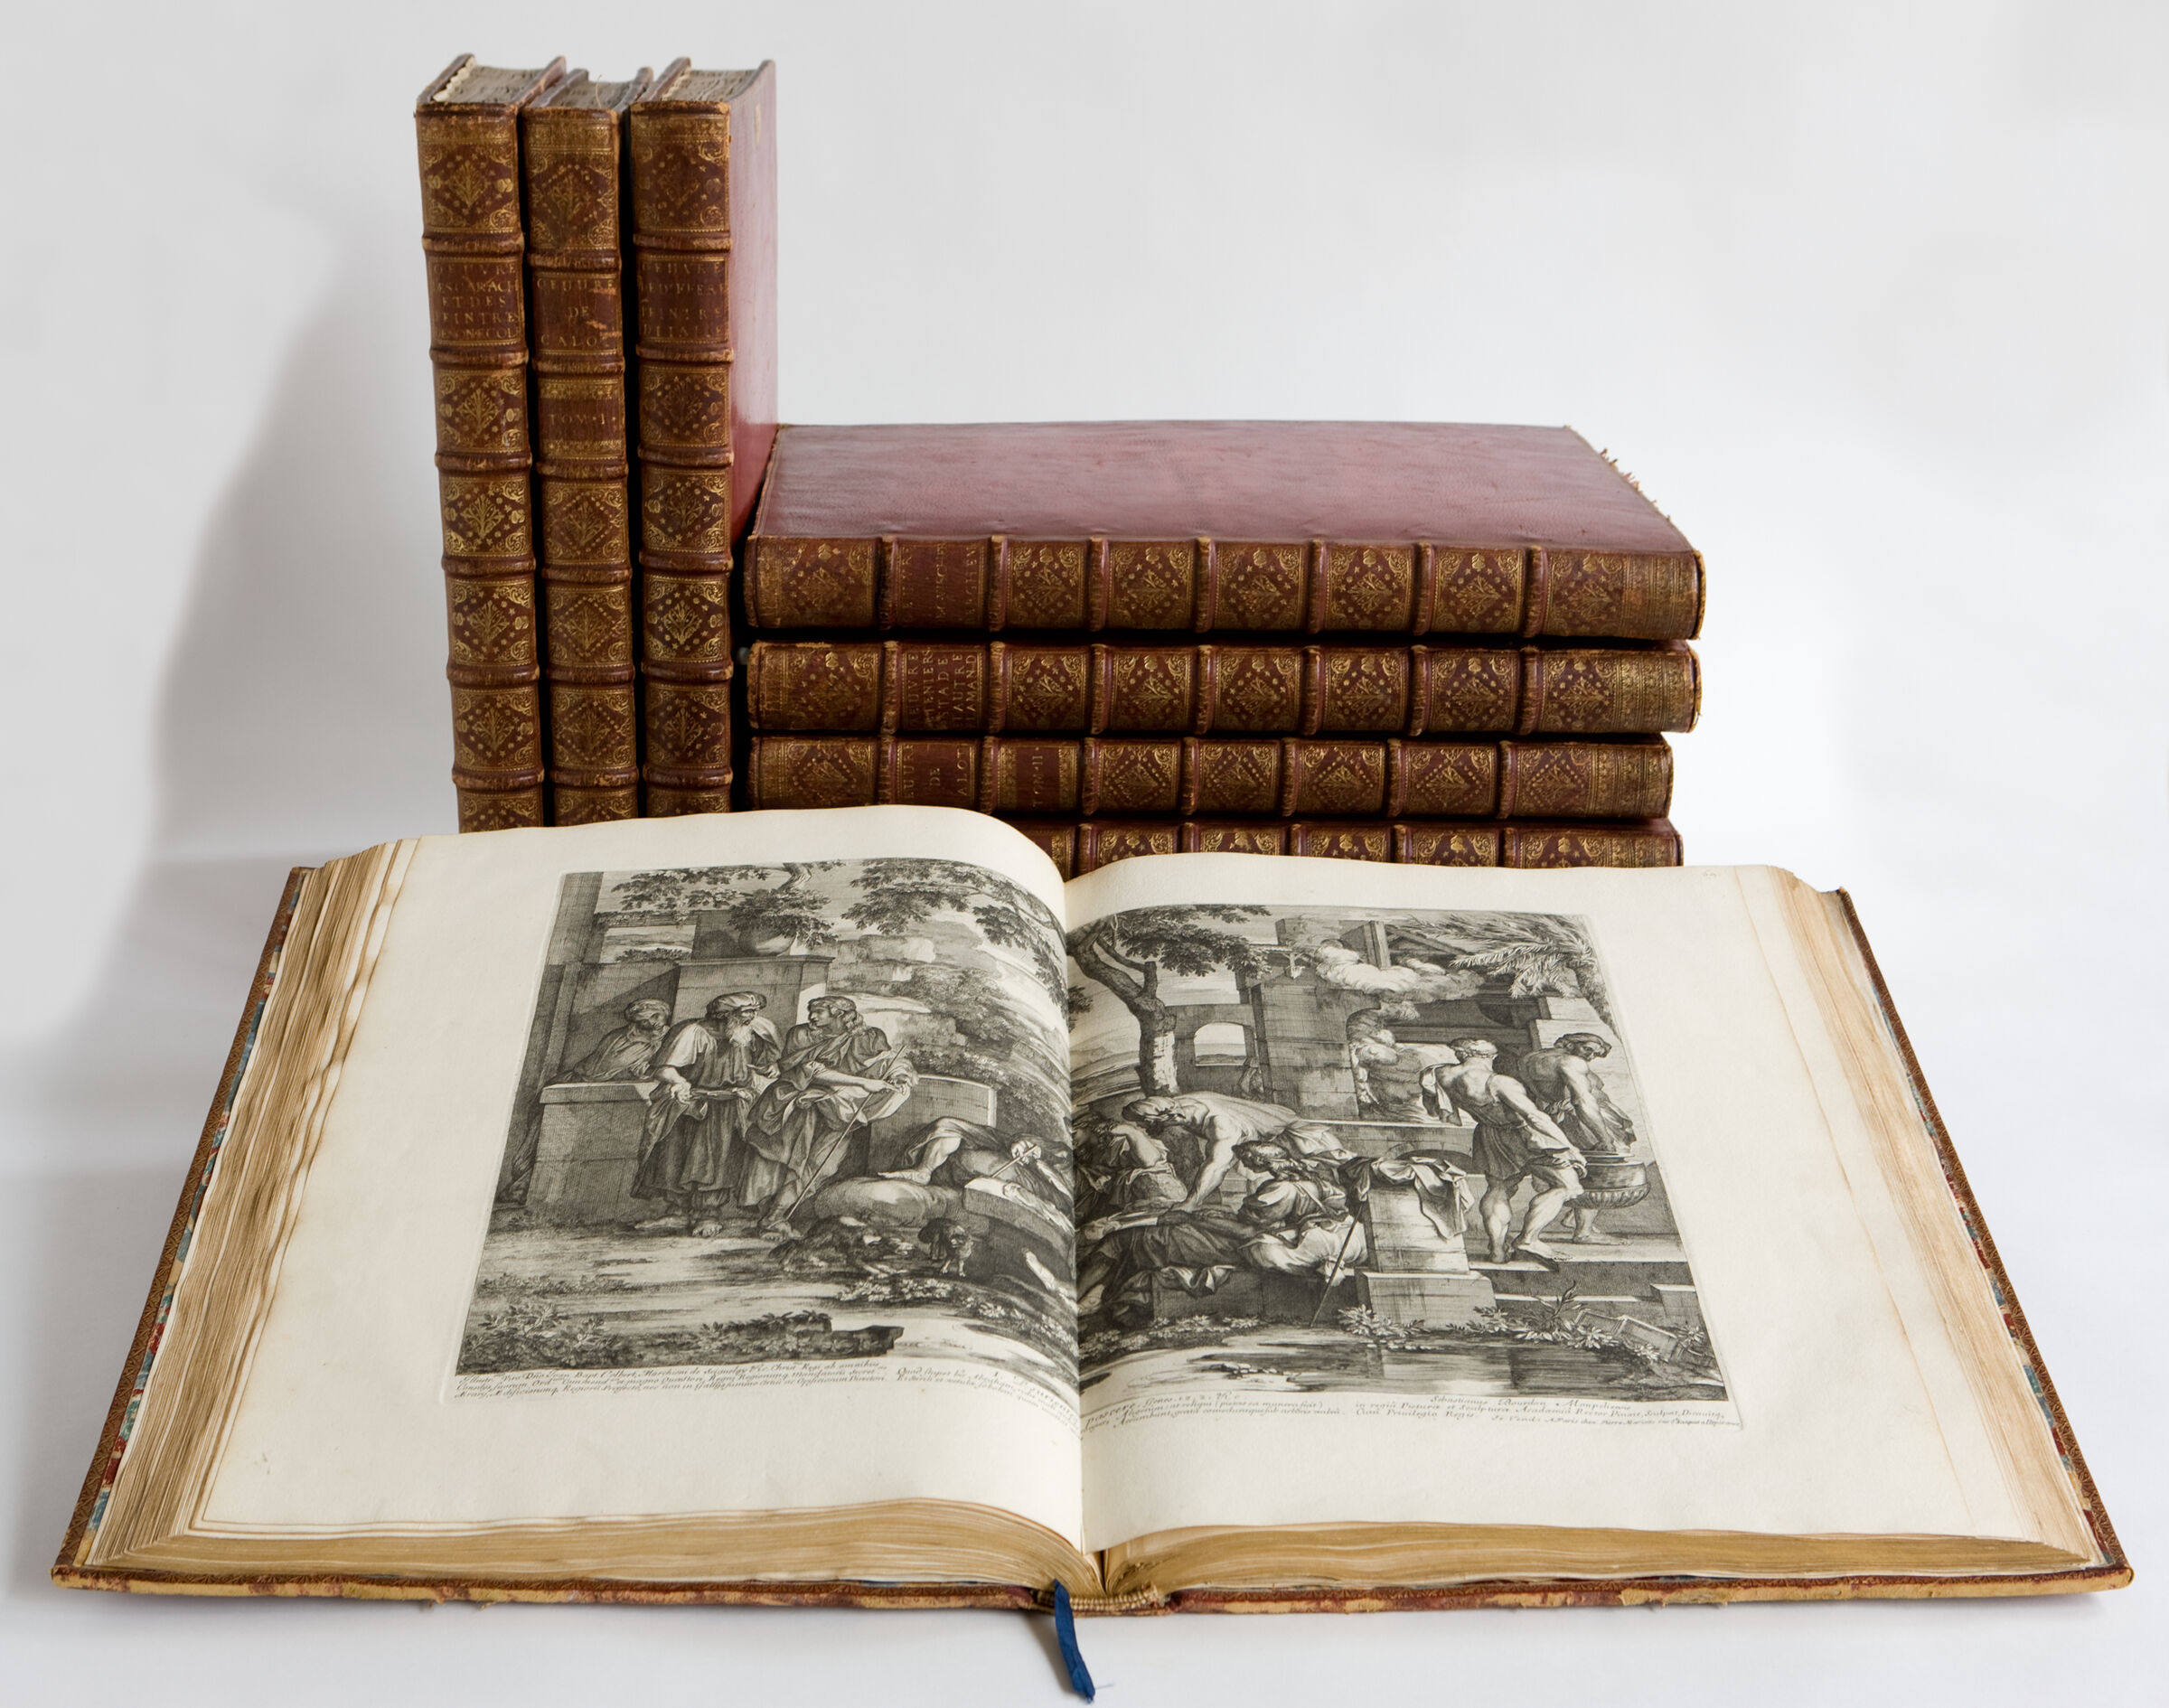 Spencer Album 6 : Works Of Ribera, Castiglione, To Which Are Added A Collection Of Choice Prints Engraved By Various Italian Painters